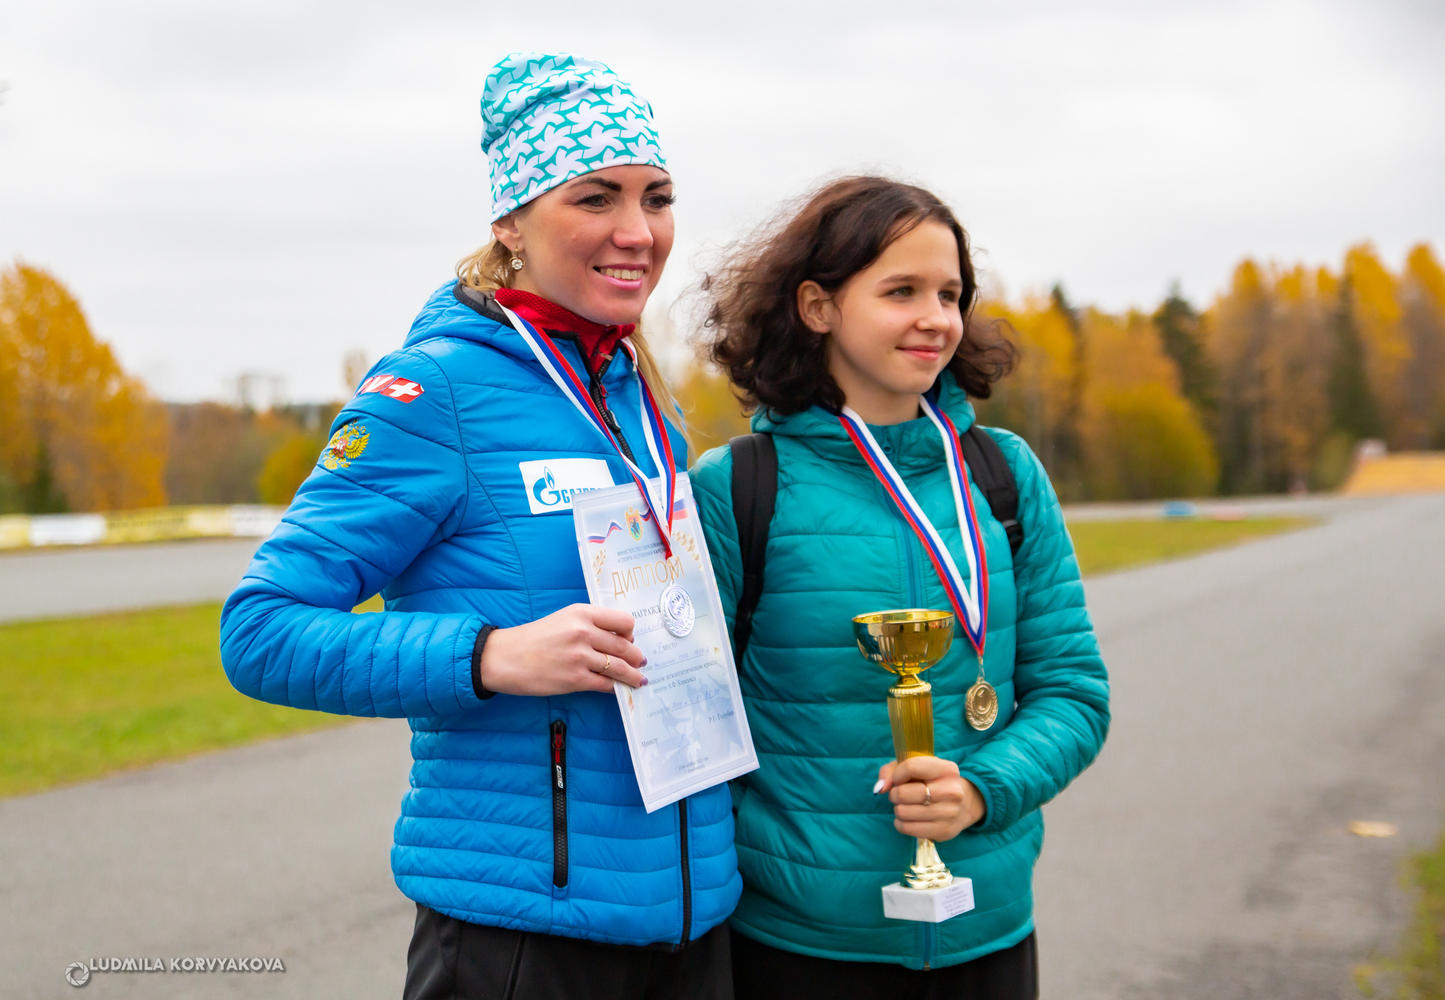 The will to win gathered athletes of Karelia at the Republican athletics cross